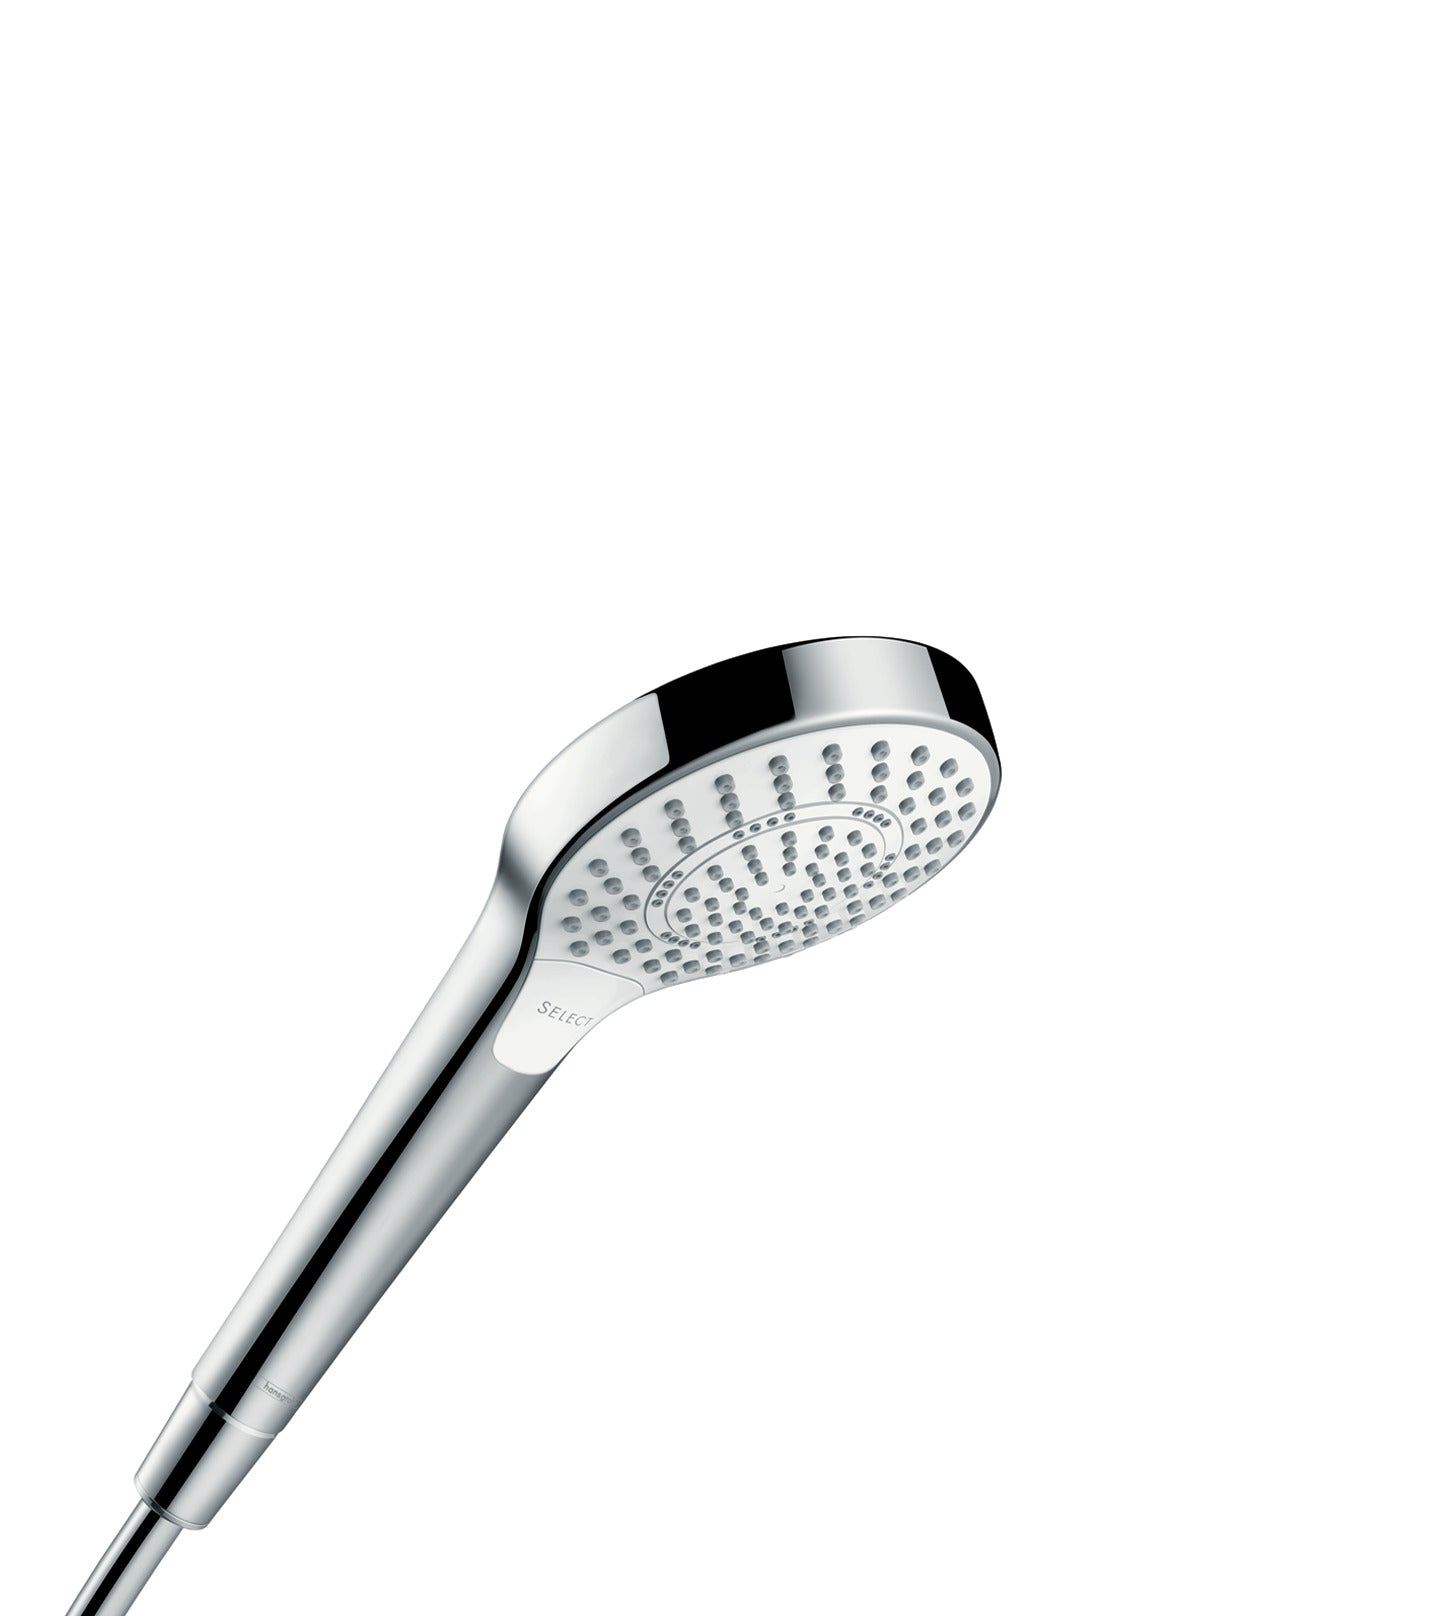 HANSGROHE 26801401 Croma Select S Handshower 110 3-Jet, 2.0 GPM in White/Chrome